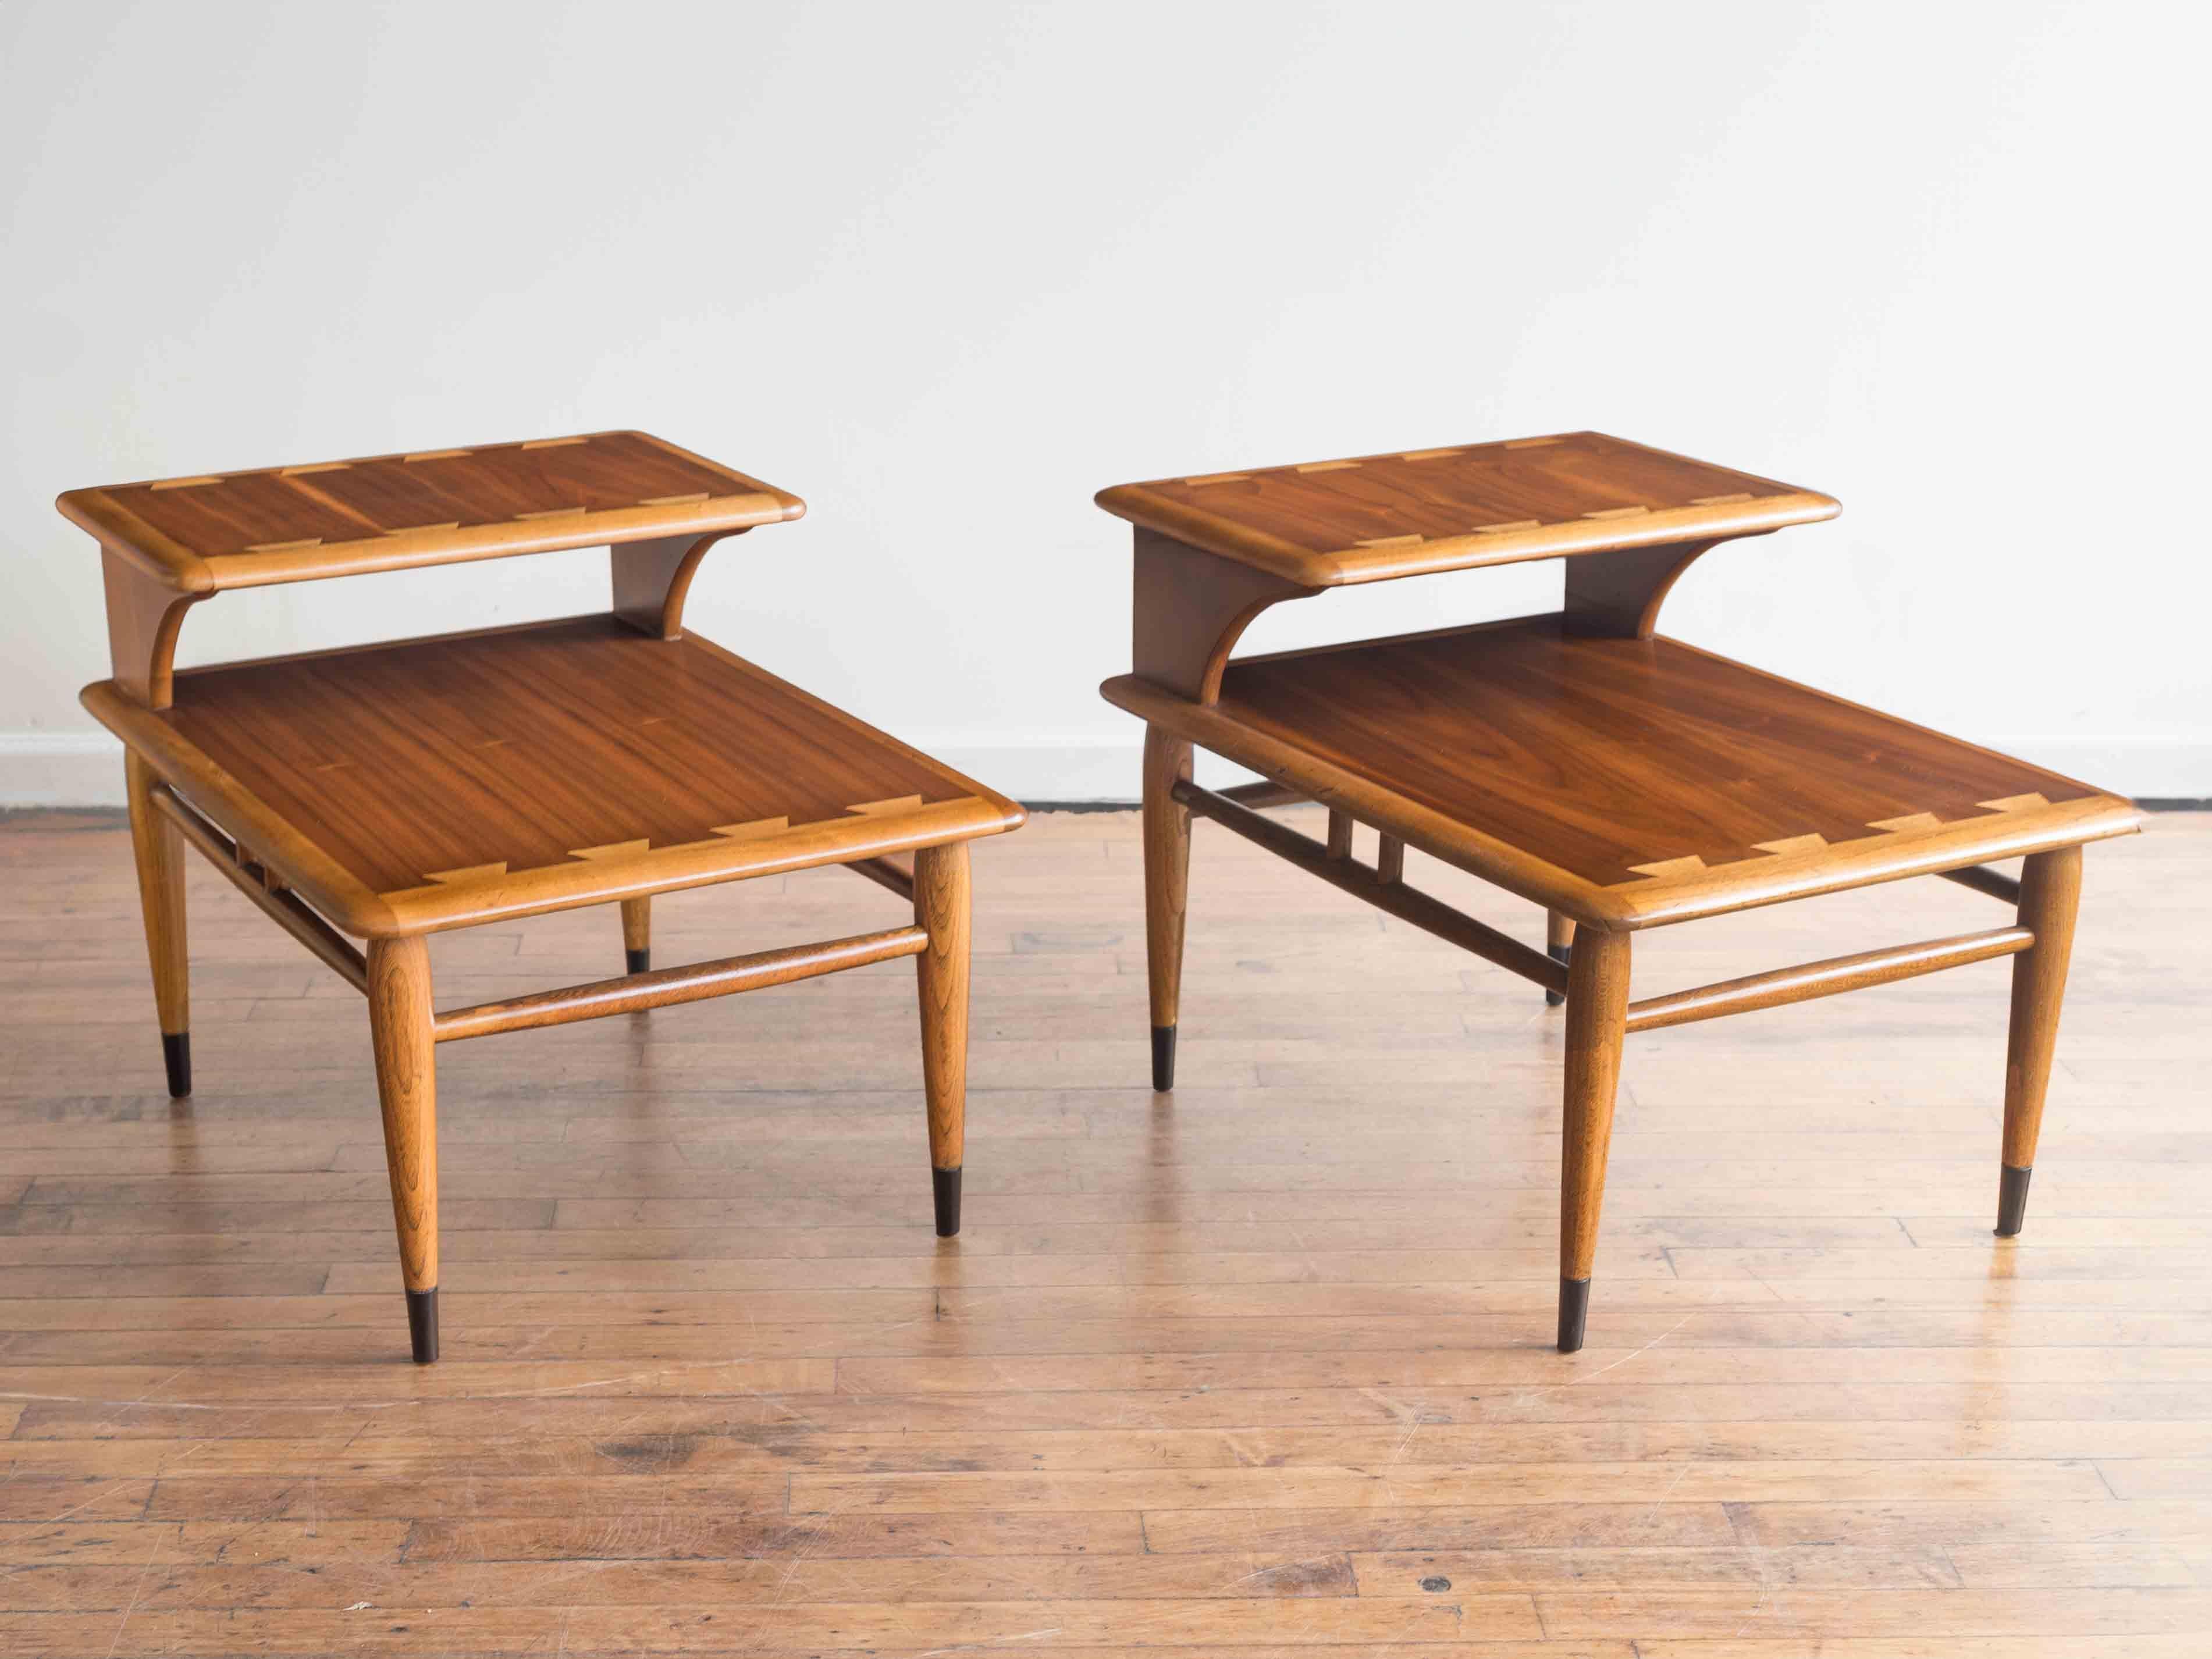 21” x 28” x 14.5”H; shelf 21”H

Pair of iconic Lane Acclaim step tables or end tables

•Elm dovetail inlays
•Walnut tops
•back shelf is 21” high
•round tapered legs accented with black lacquered tips

These are newly refinished to match their